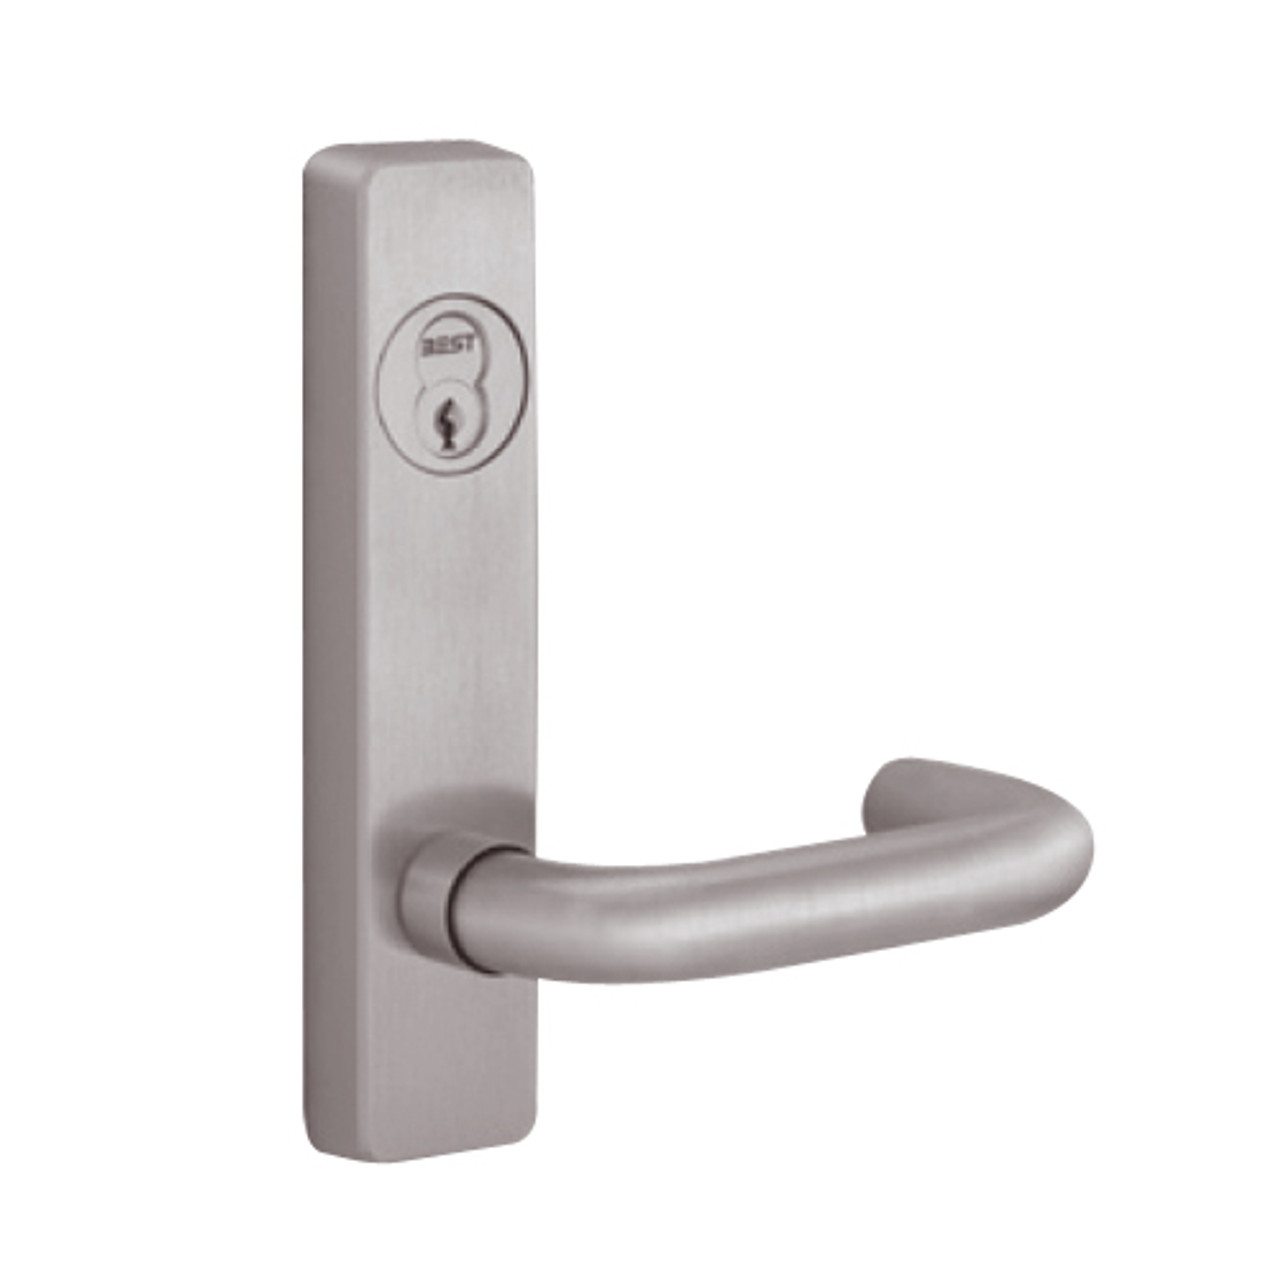 2908C-630-LHR PHI Key Controls Lever Trim with C Lever Design for Apex Series Narrow Stile Door Exit Device in Satin Stainless Steel Finish